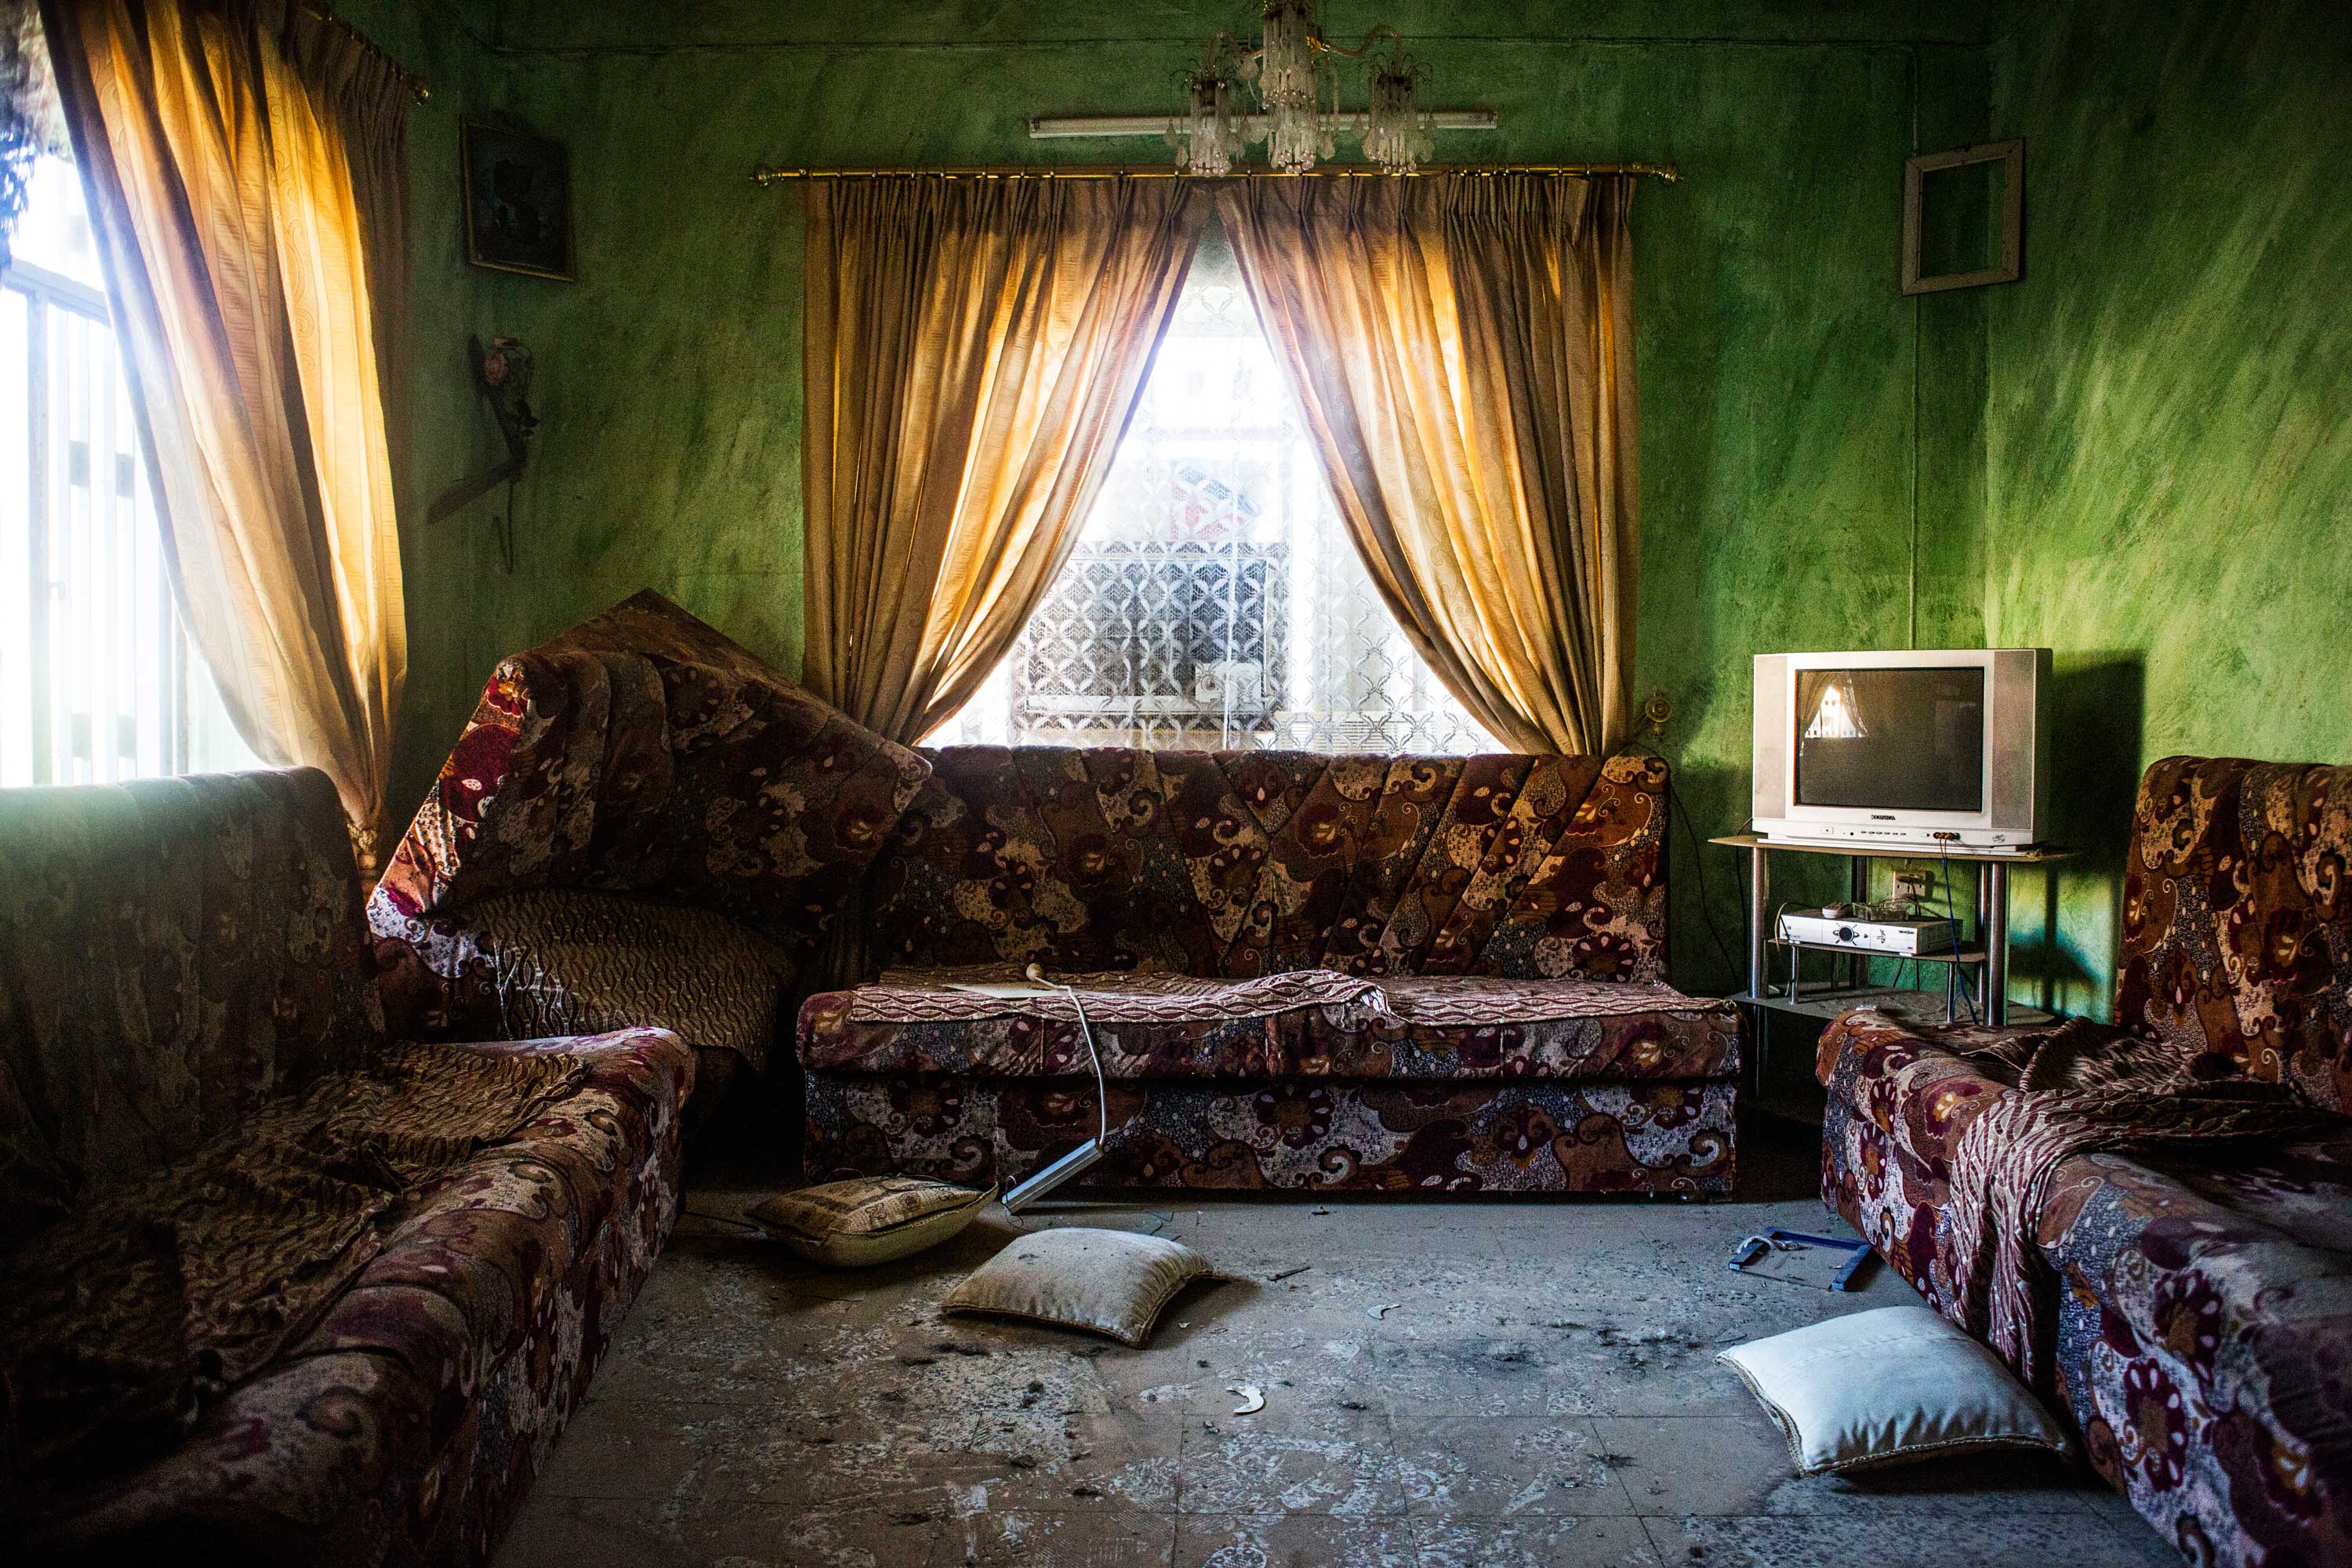 This living room was looted by ISIS militants.